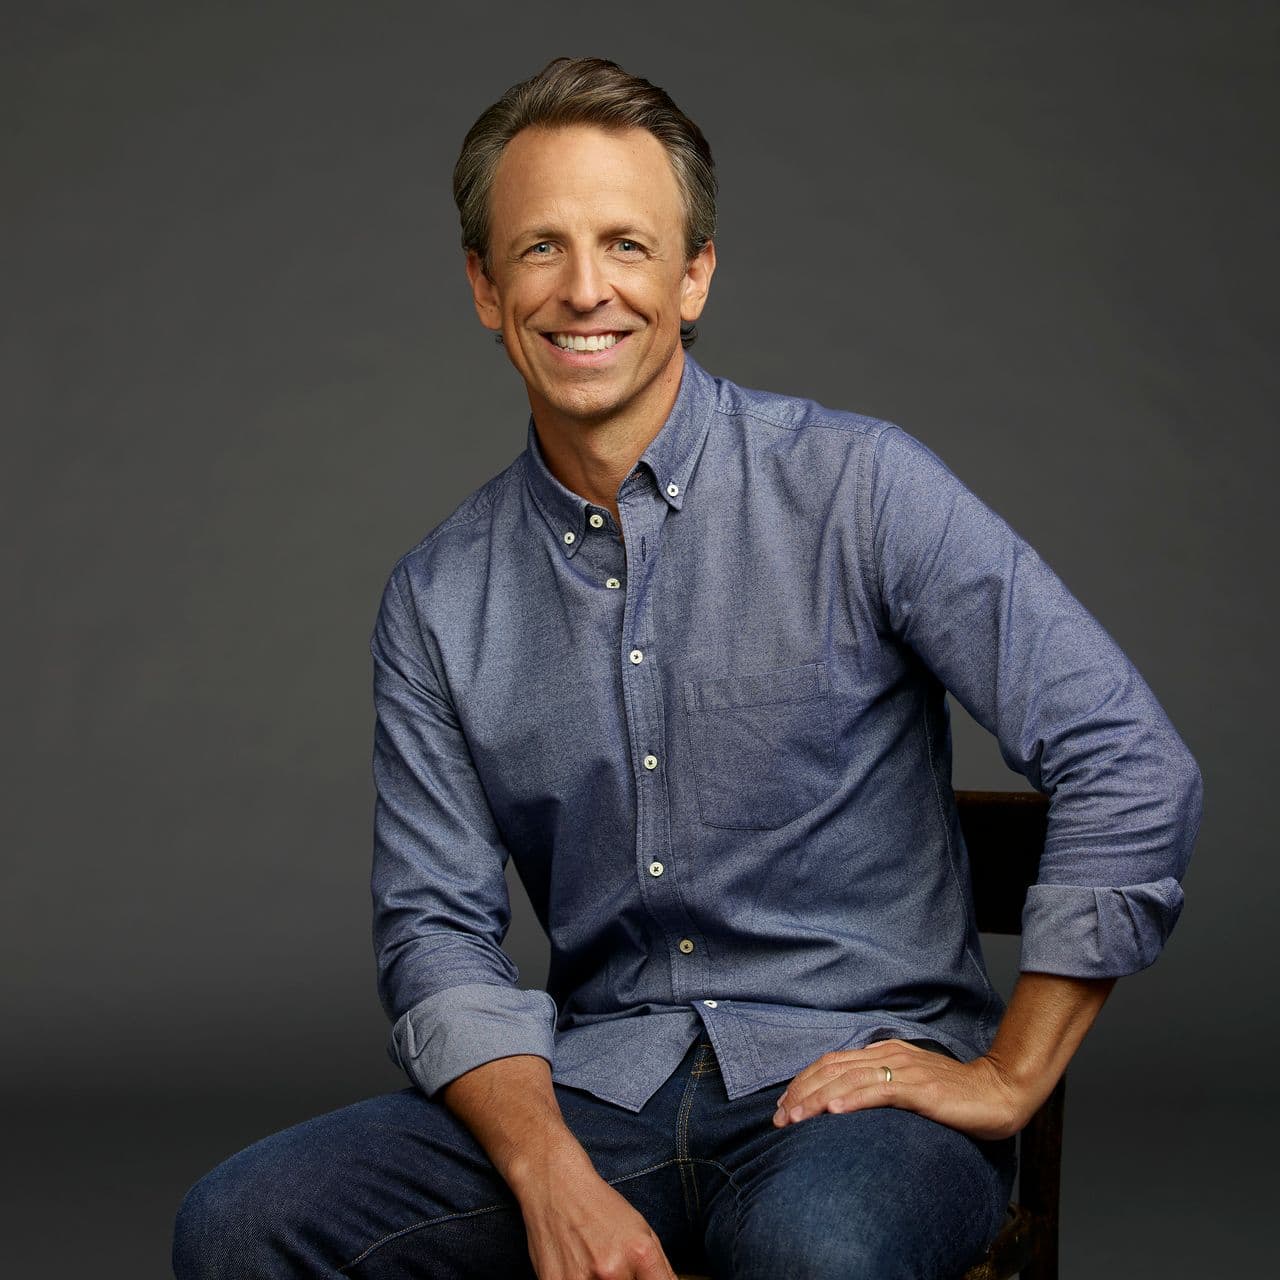 How rich is Seth Meyers?